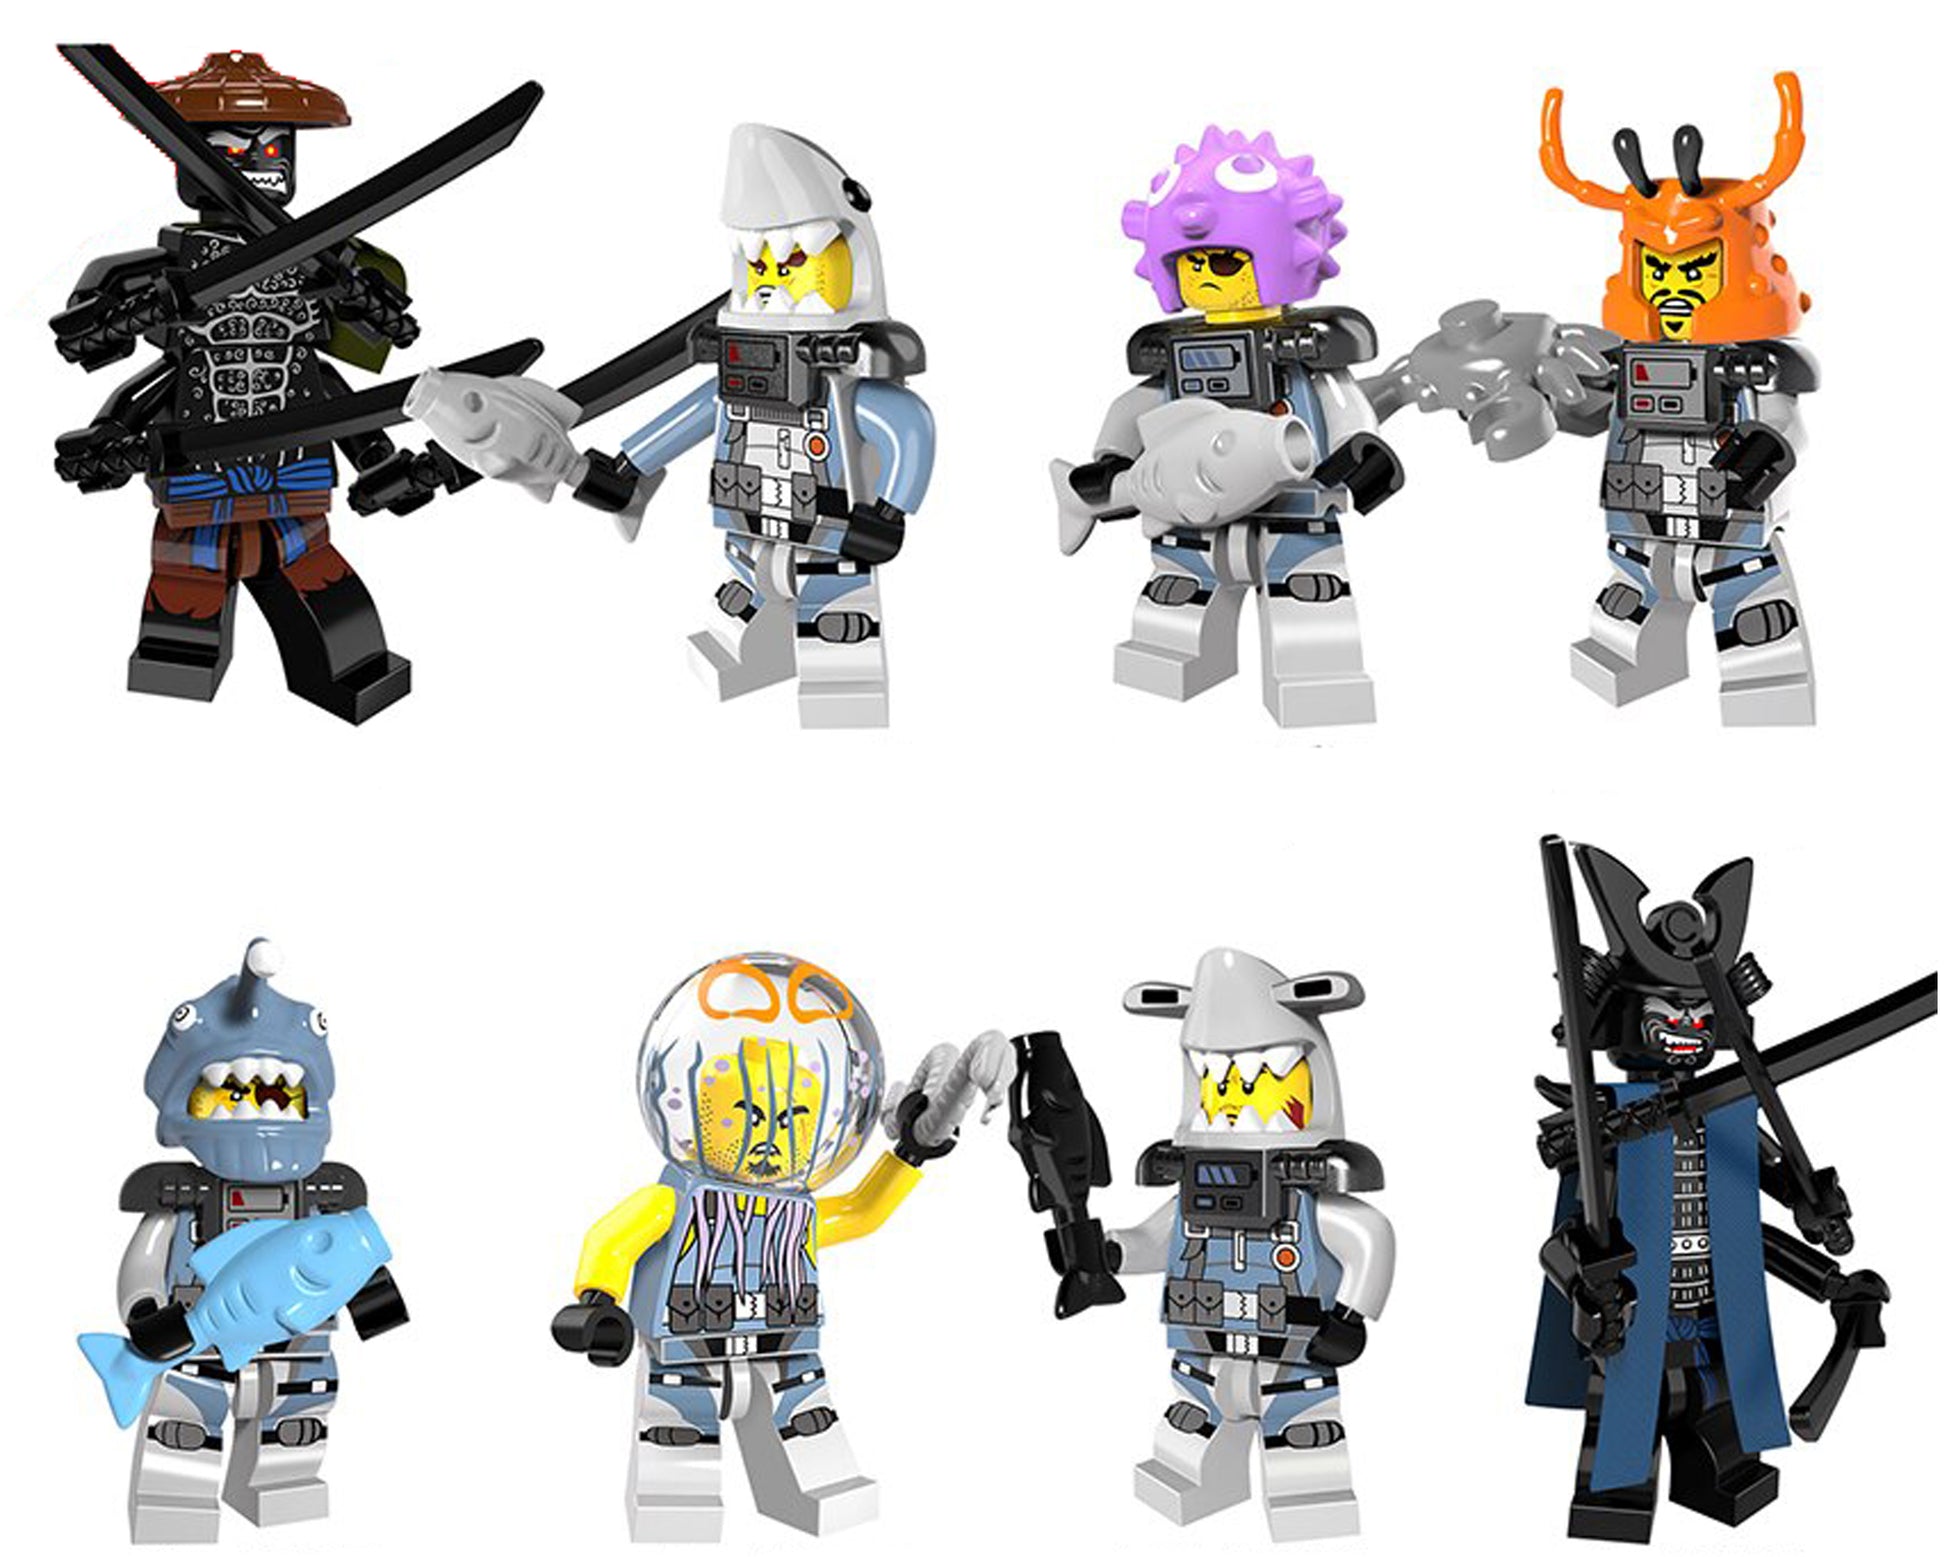 Ninjago Lord and the Shark Set of 8 Minifigures Lego compatible building block Mini action figures from Delsbricks – DelsBricks Minifigures